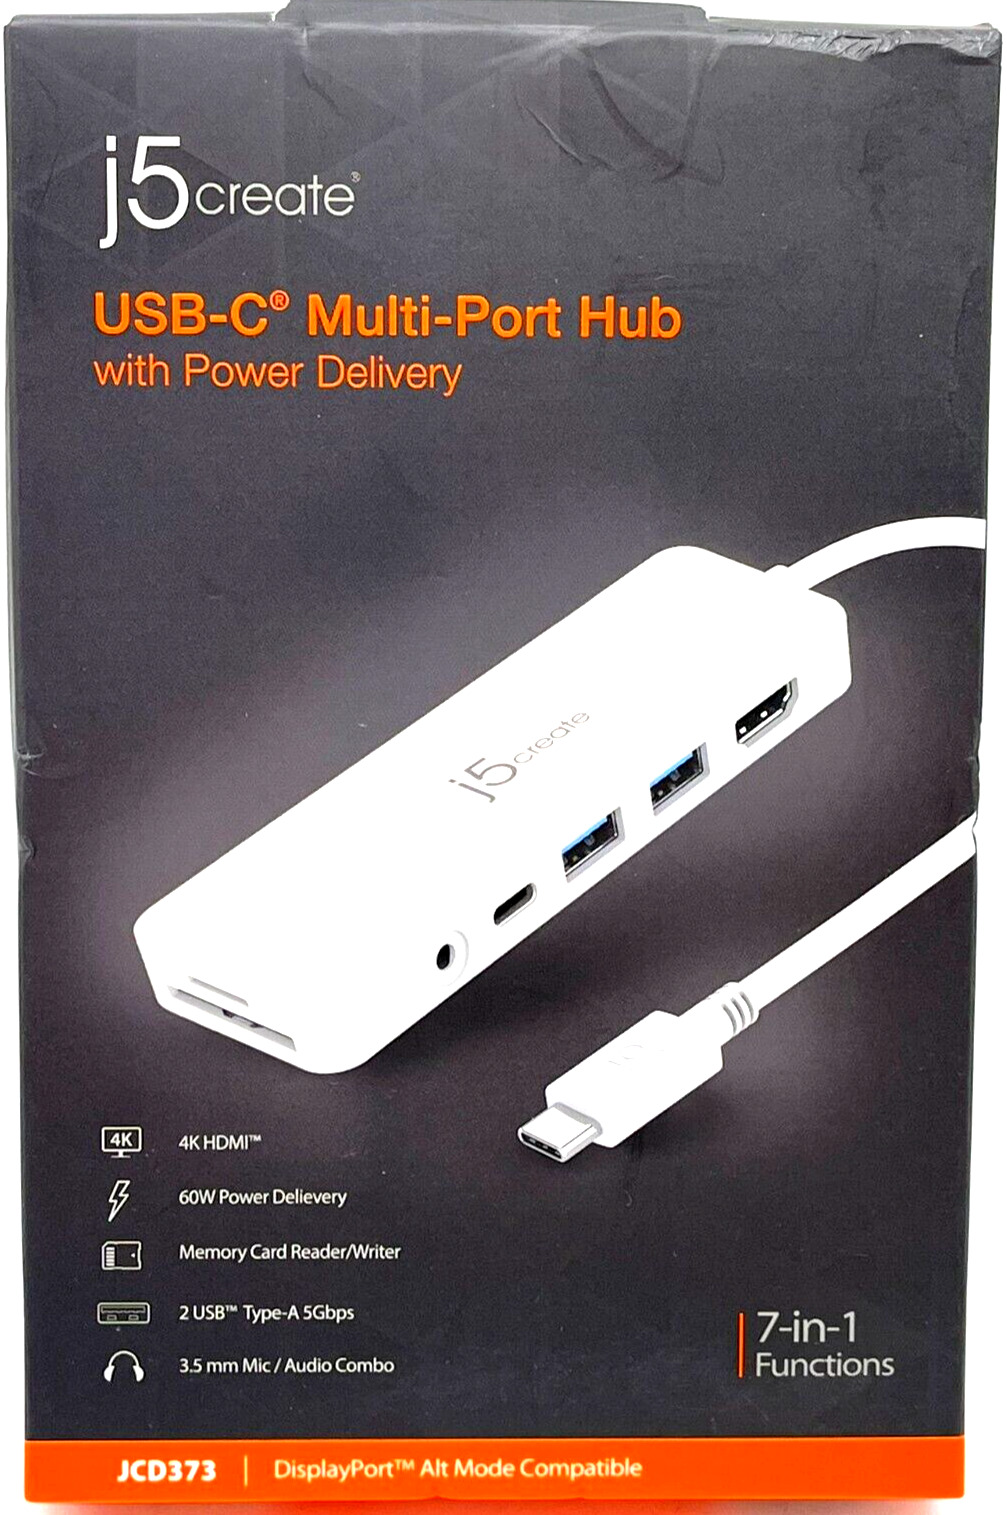 New j5 create USB-C Multi-Port Hub With Power Delivery JCD373- BRAND NEW